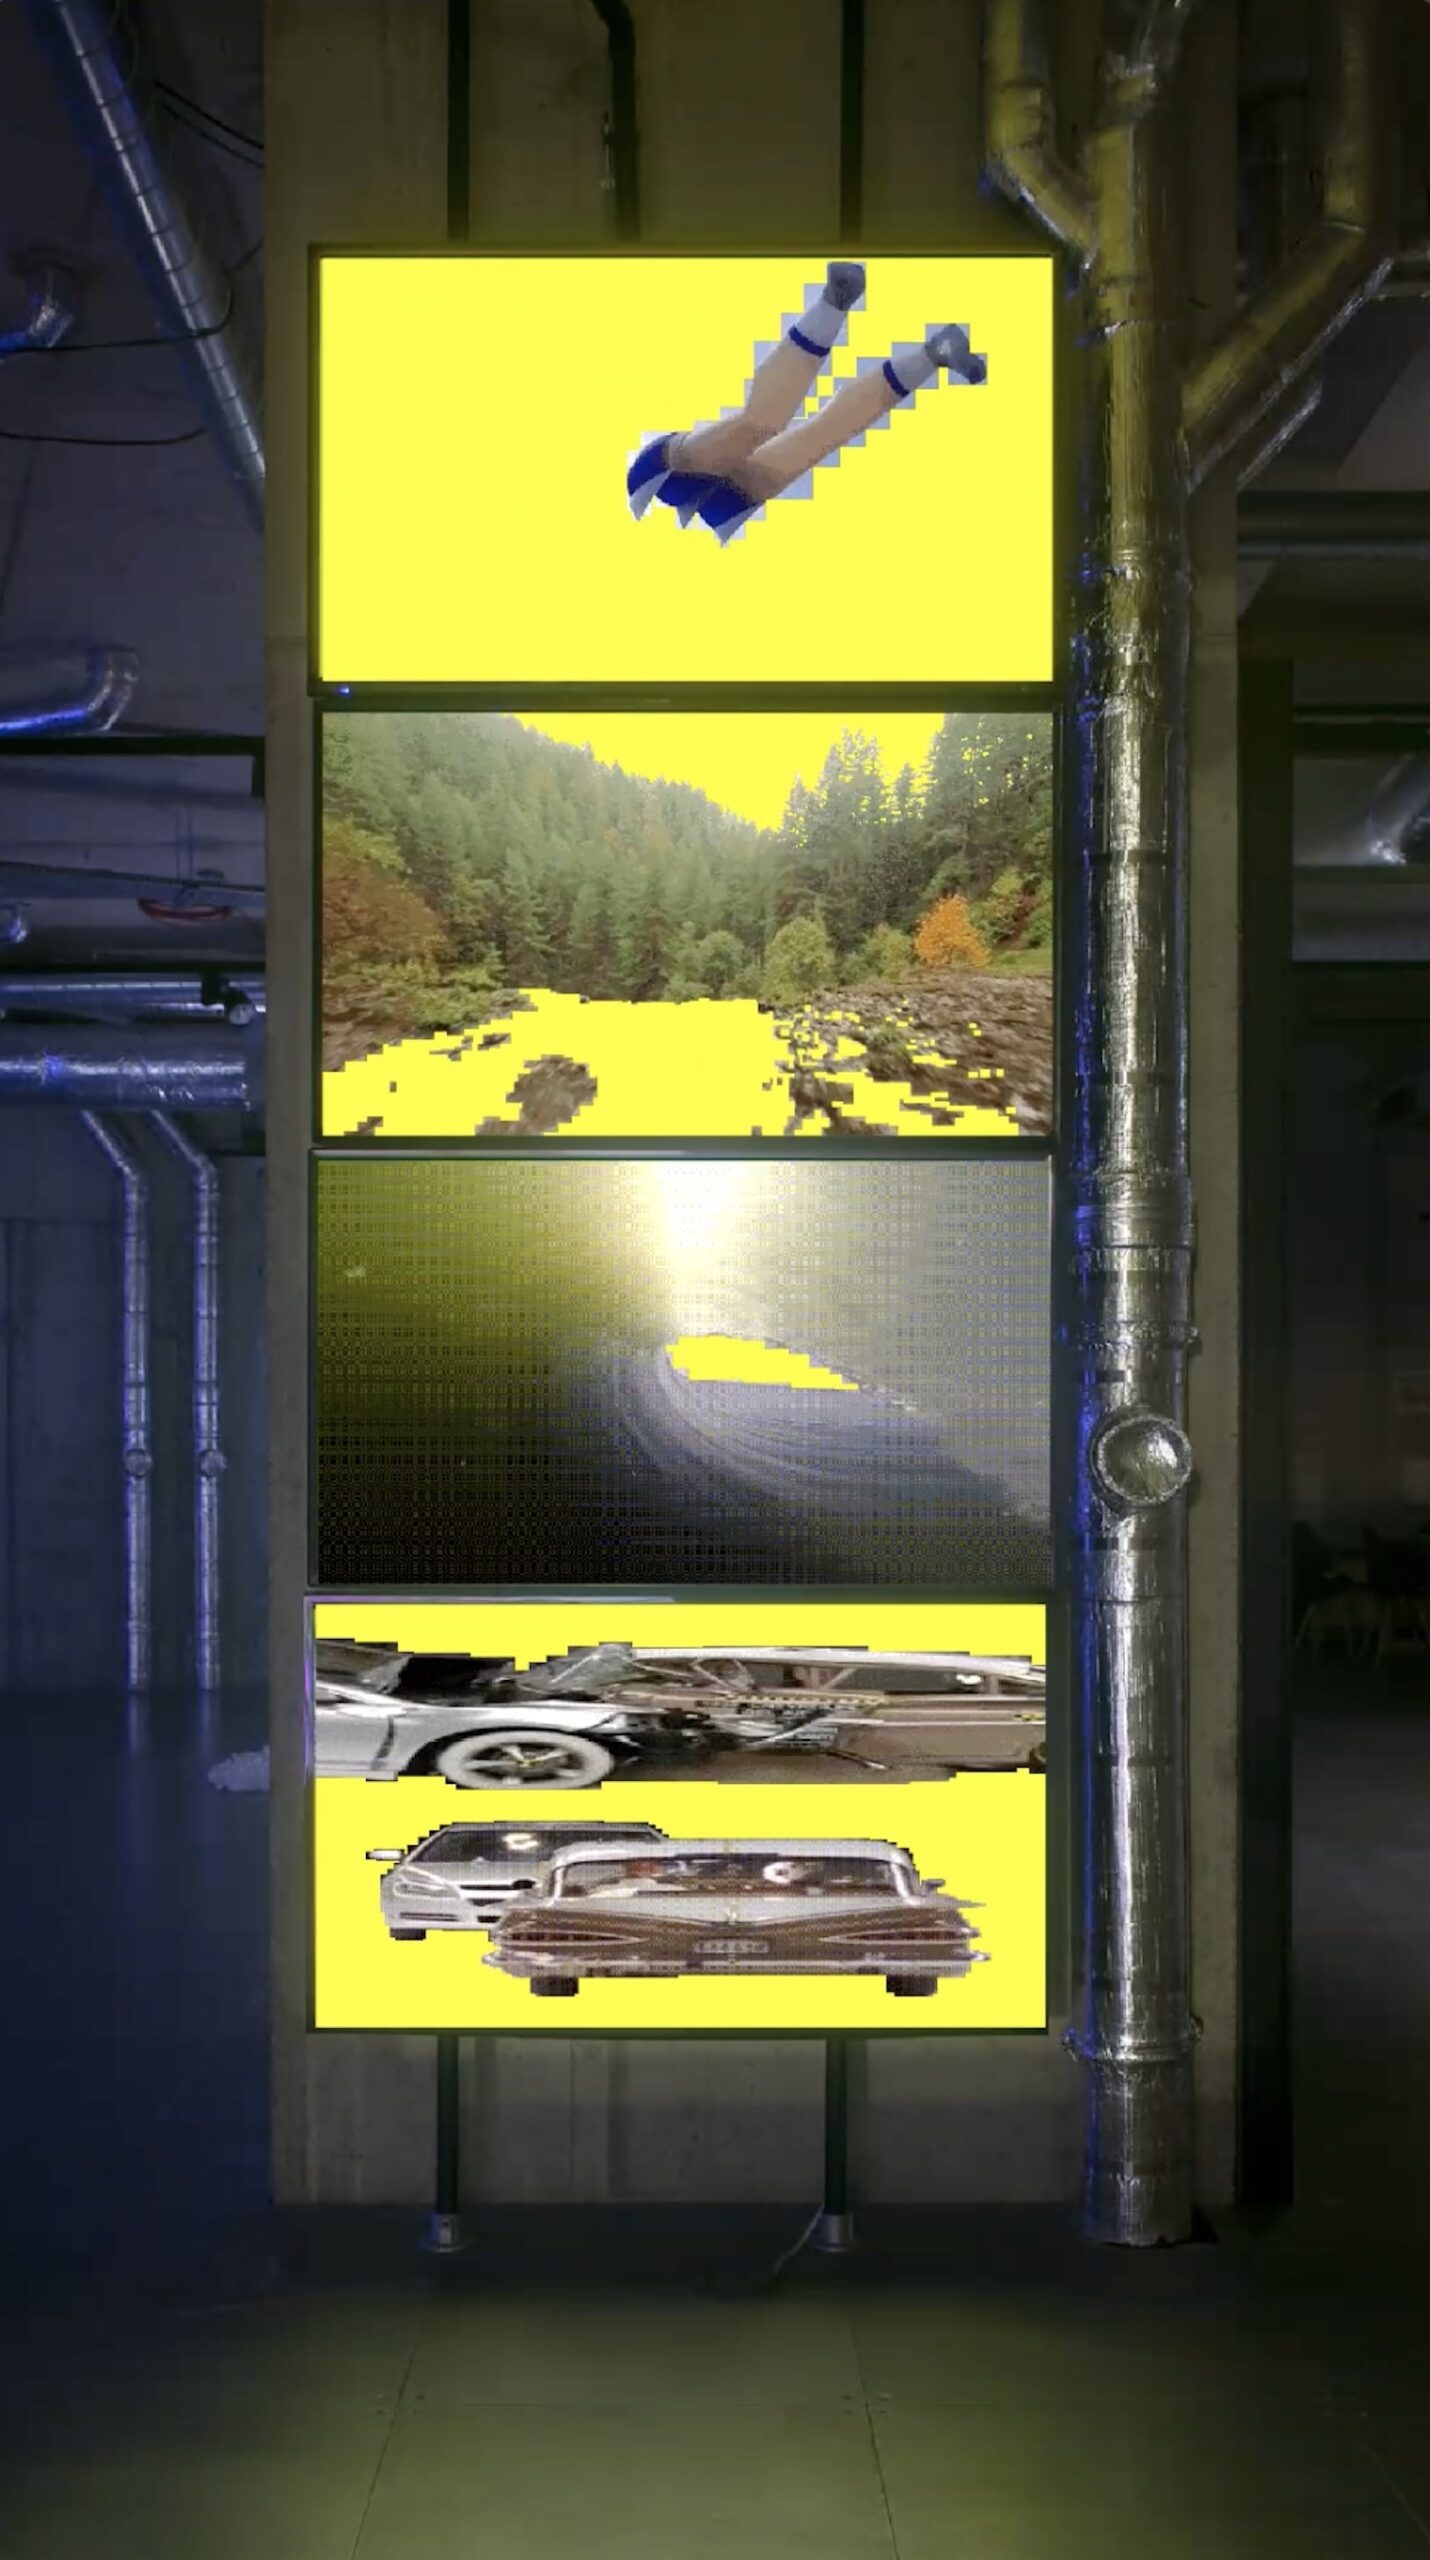 A photo of a video installation made up of four stacked flat-screen monitors each showing fragmented images on a bright yellow backdrop